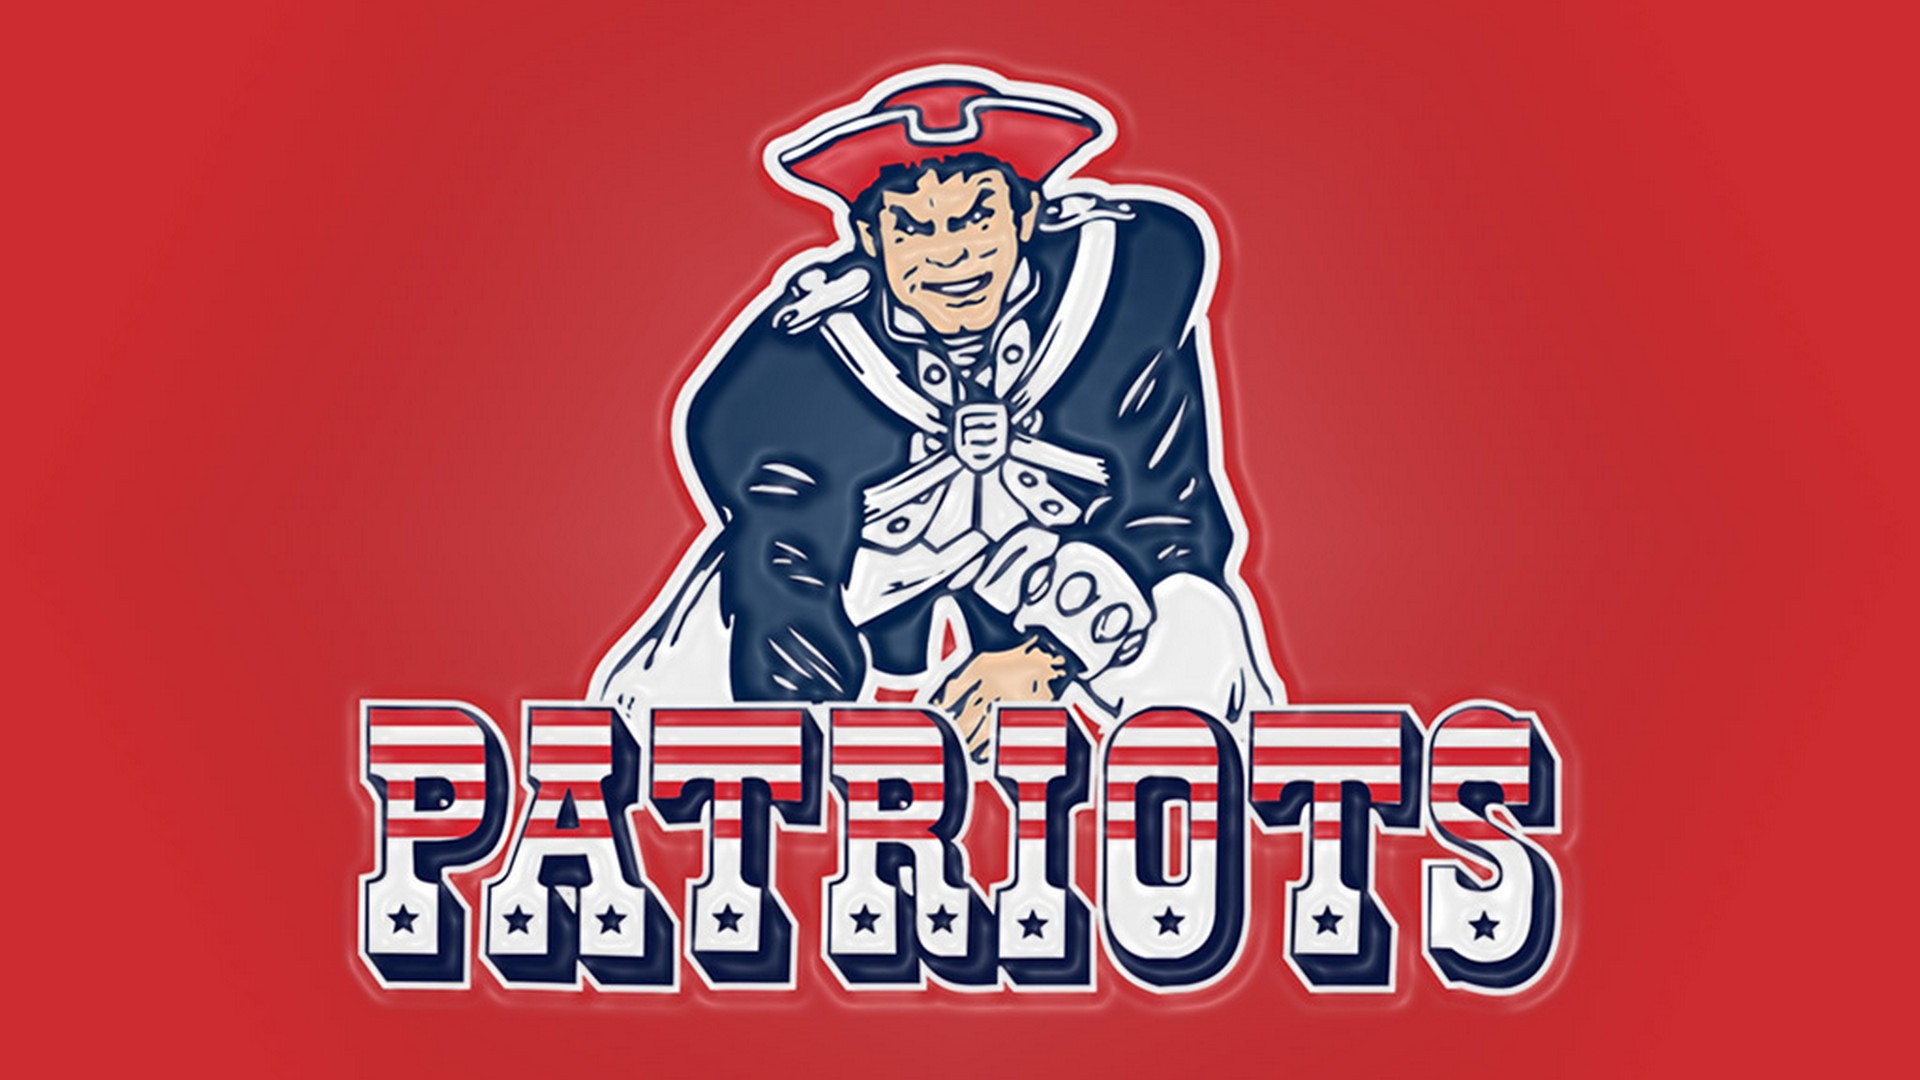 Wallpaper Desktop Patriots HD With Resolution 1920X1080 pixel. You can make this wallpaper for your Mac or Windows Desktop Background, iPhone, Android or Tablet and another Smartphone device for free